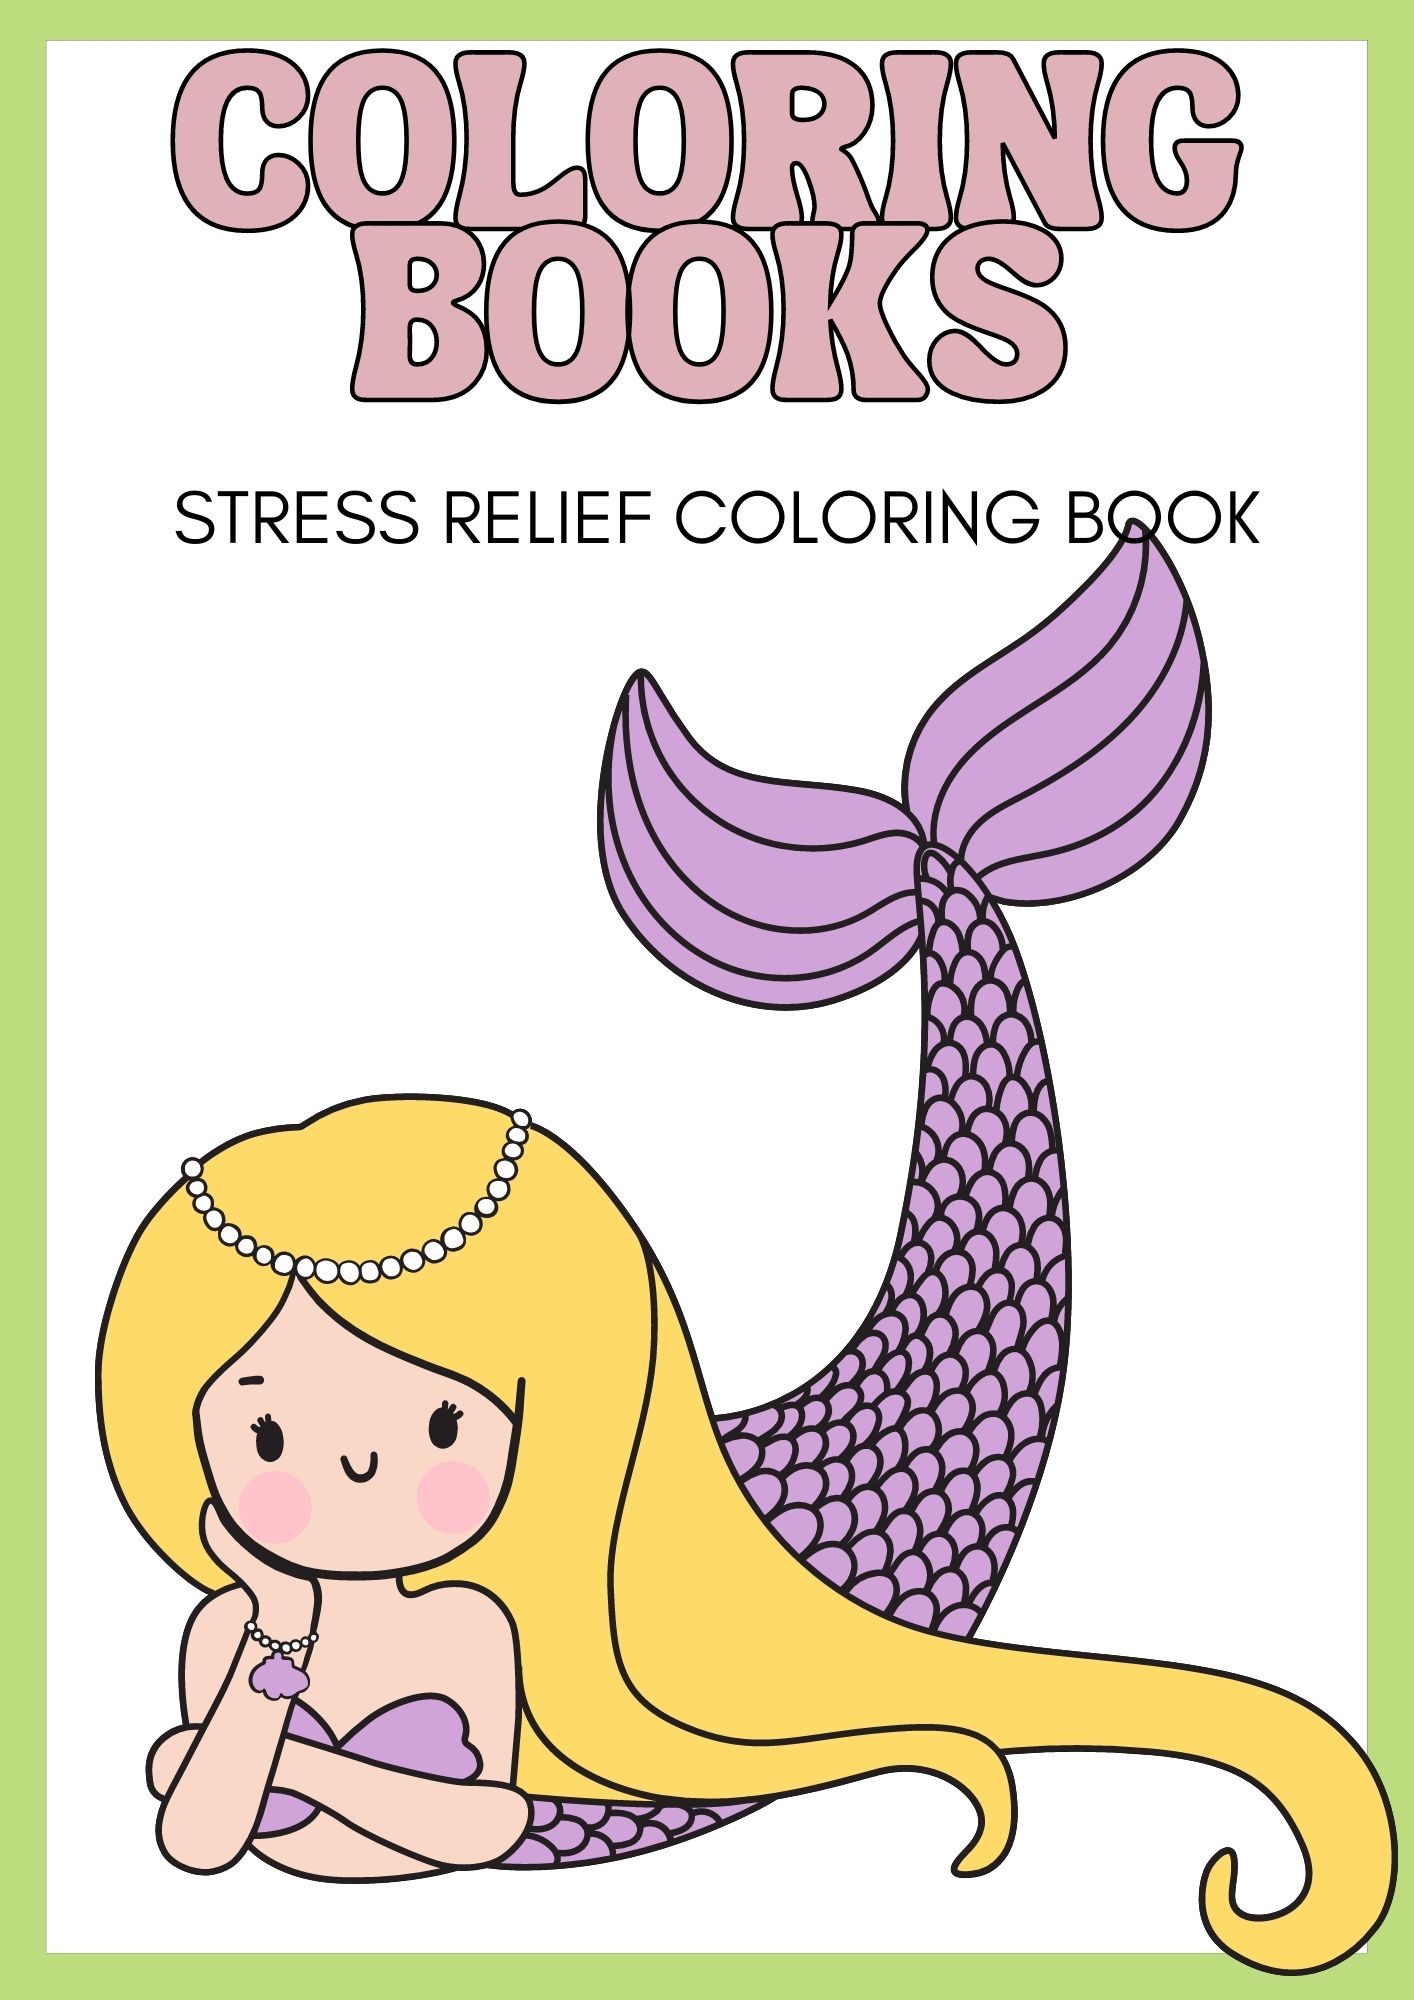 A new way to take a break from stress with Coloring books for adults